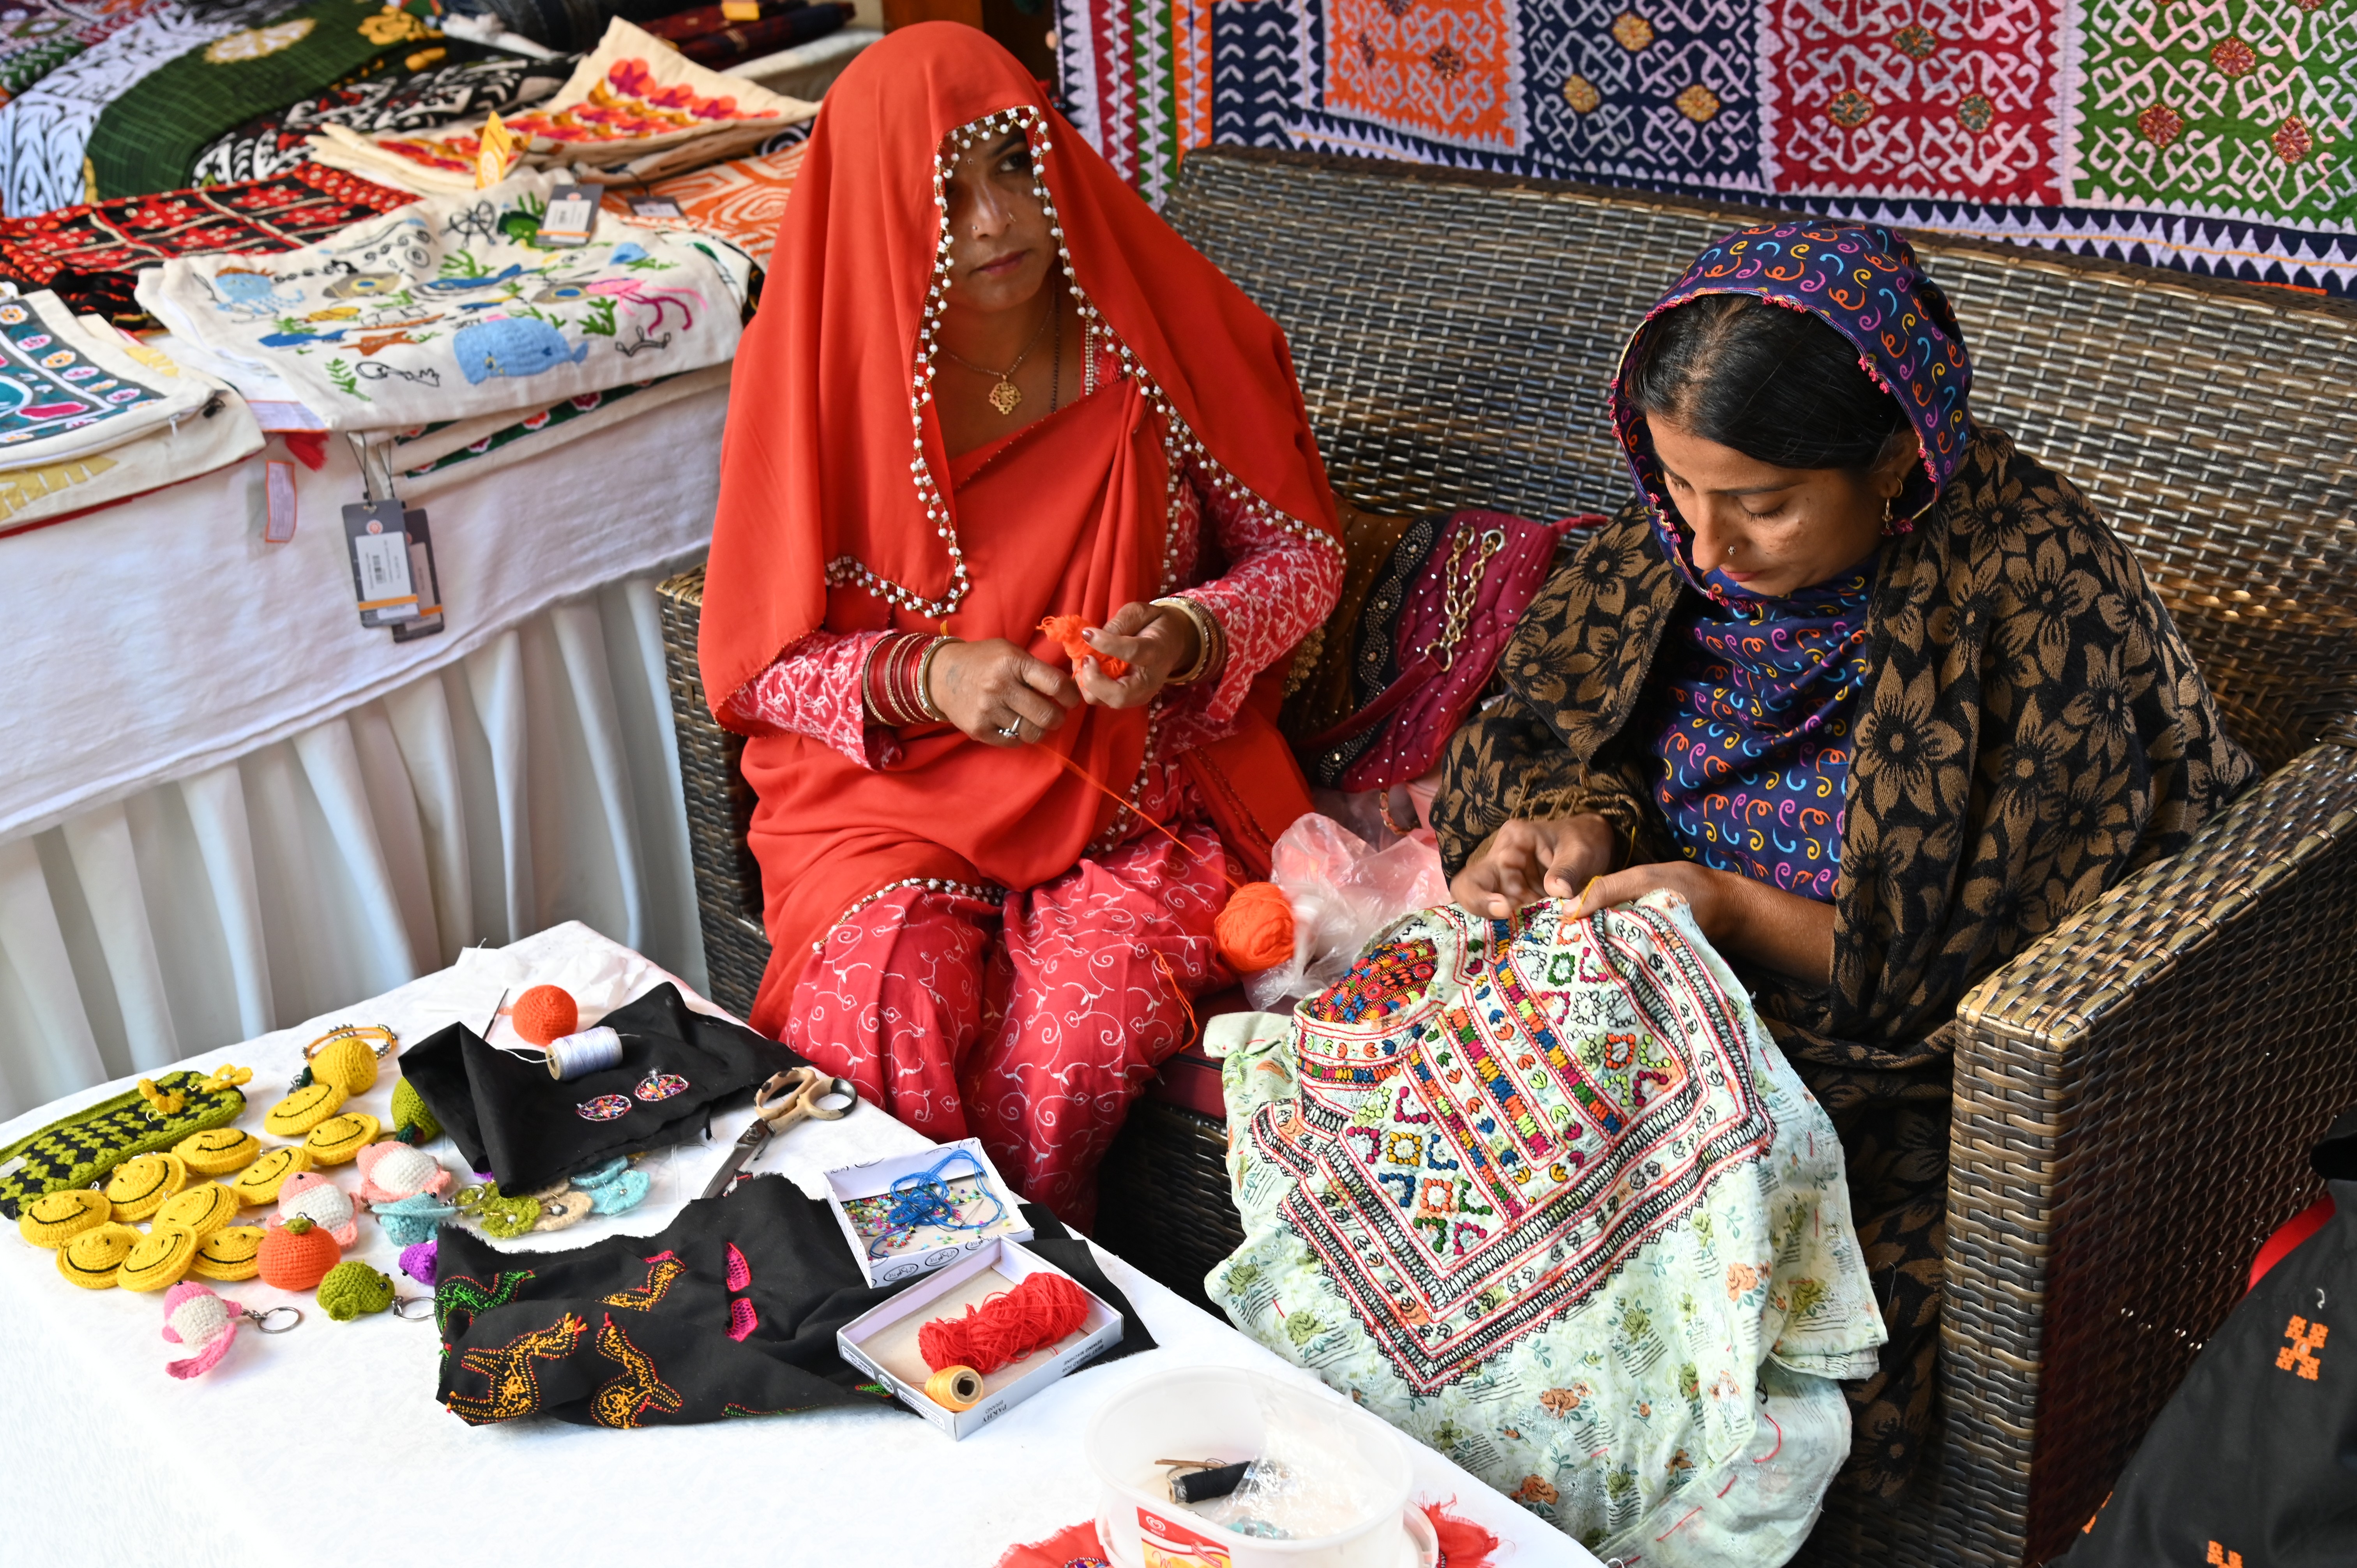 Women busy with embroidery work